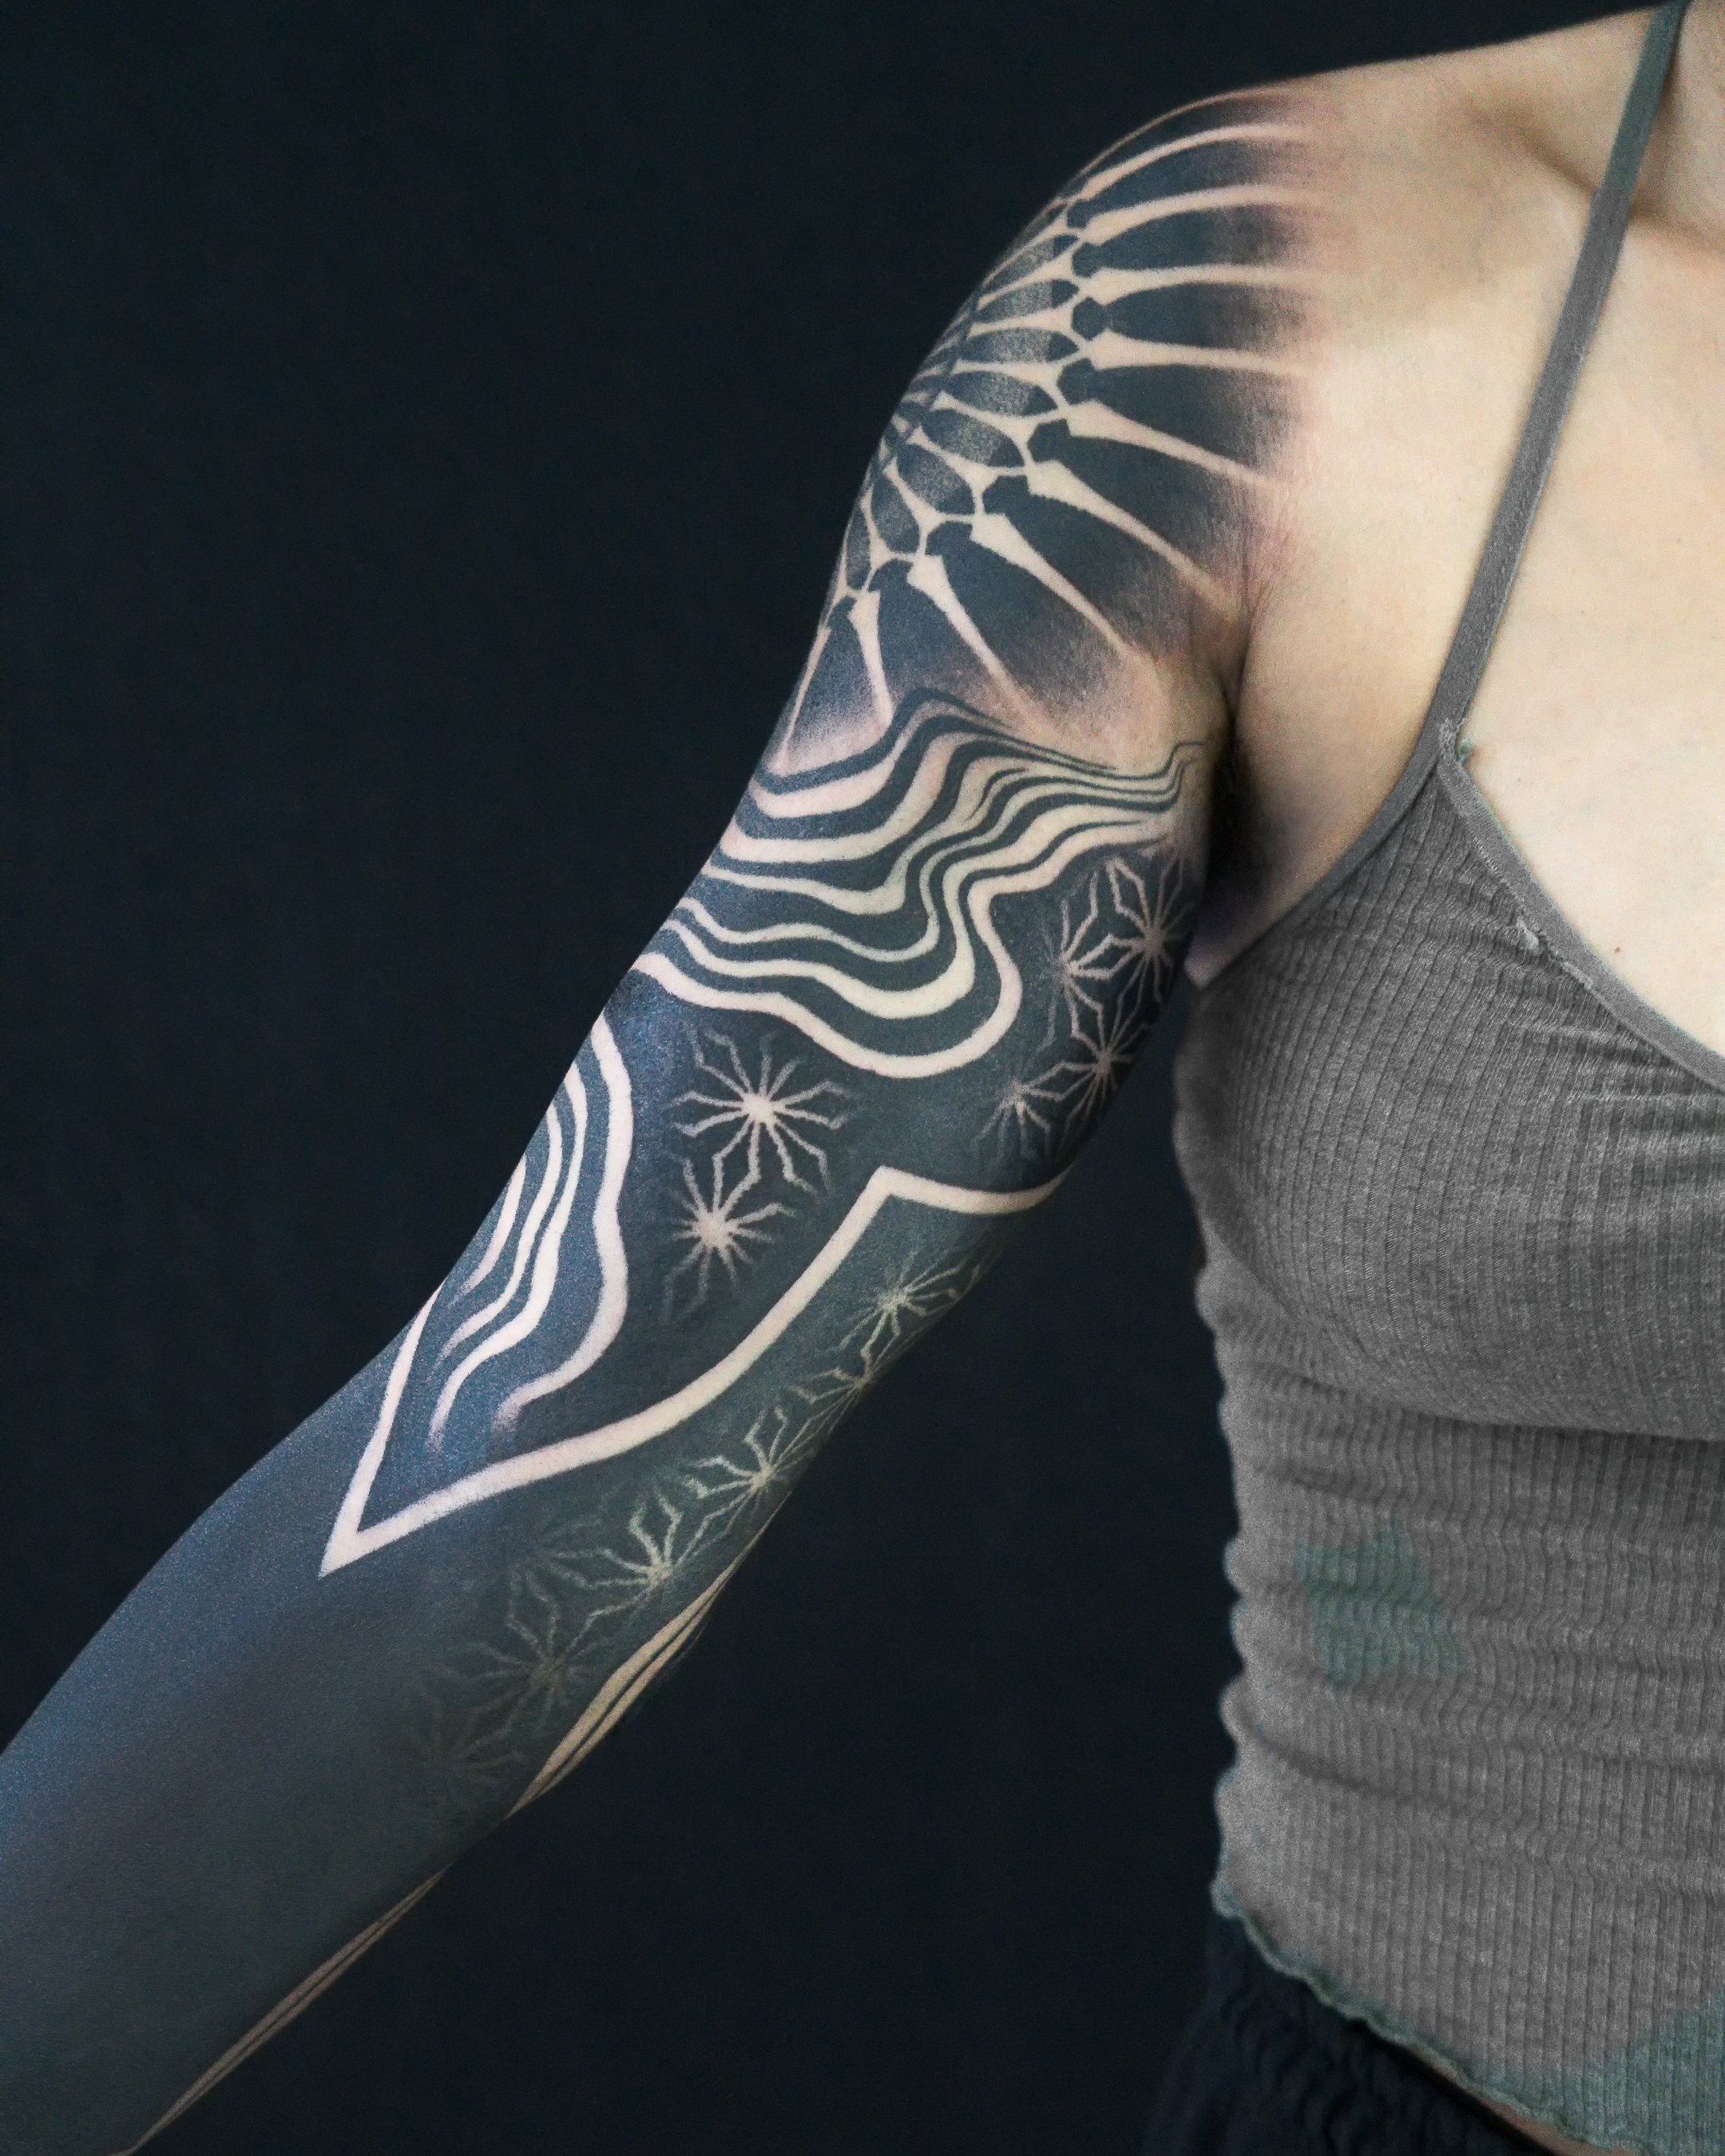 What do you call this type of tattoos ? (The full black arm one) also will  it cost a lot considering that it requires a lot of ink ? Even tho it